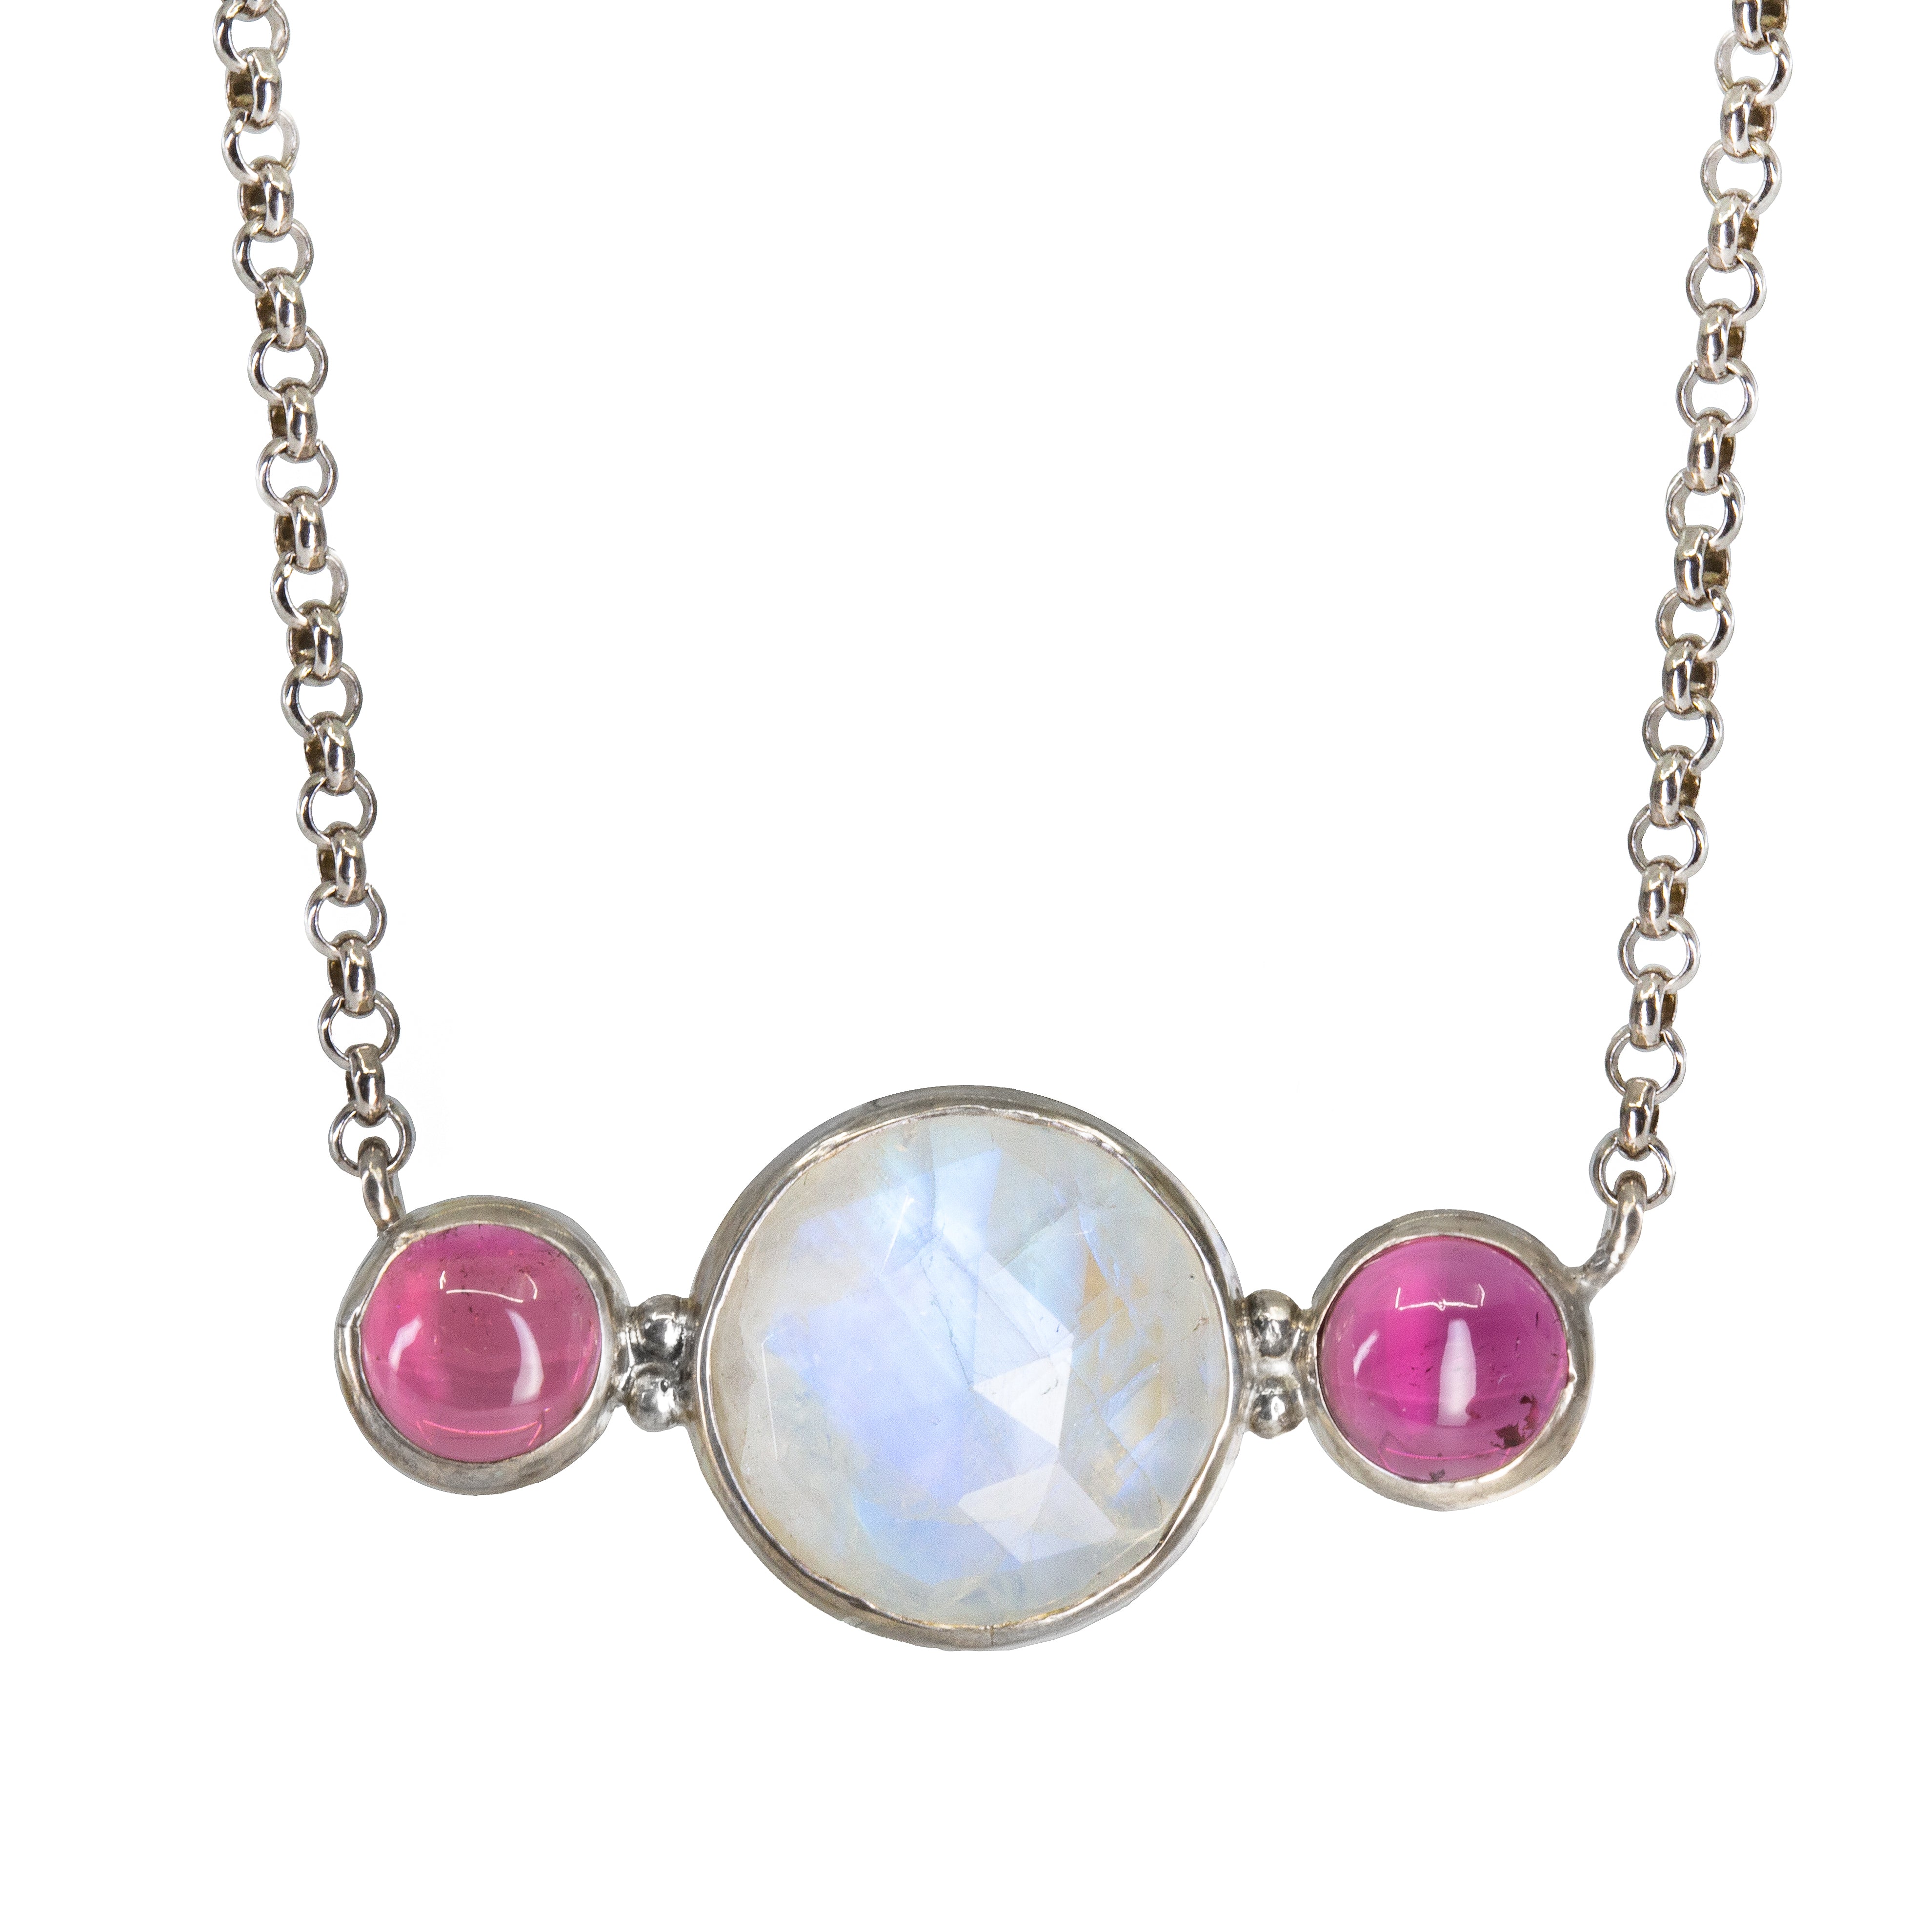 Blue Moonstone 38.2 ct with Pink Tourmaline Handcrafted Sterling Silver Necklace - GGO-159 - Crystalarium